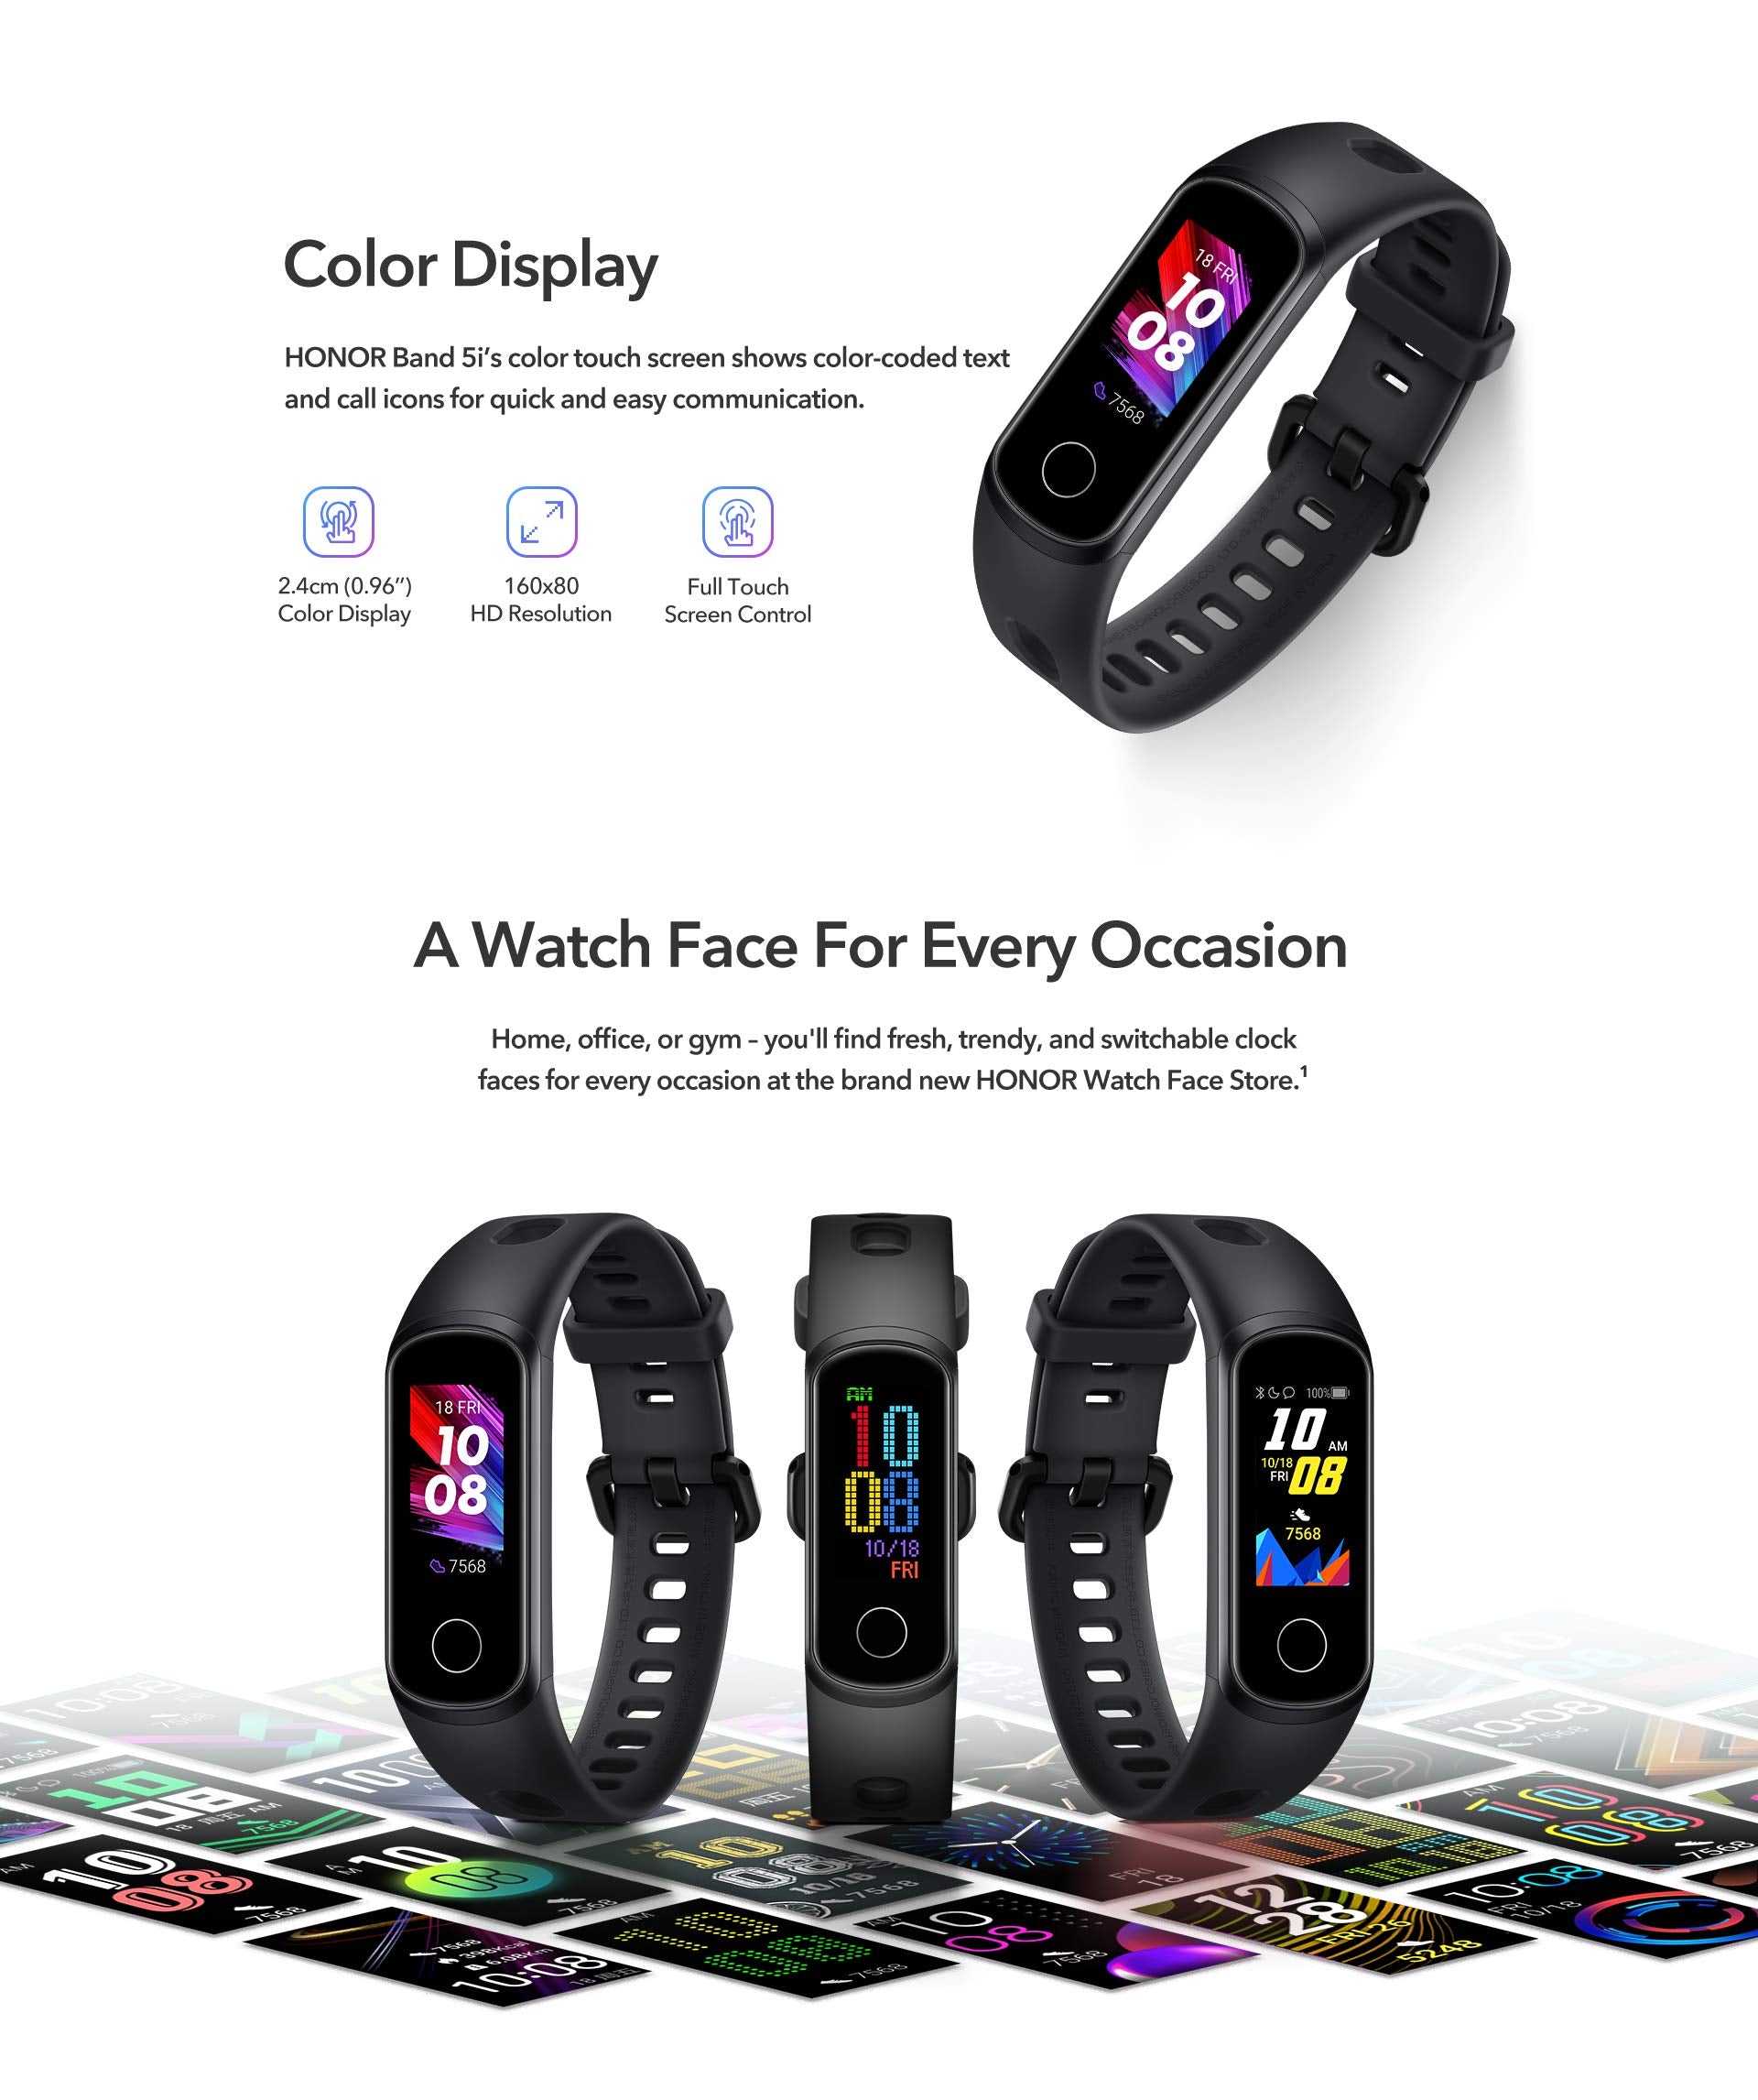 honor band 5i in india price